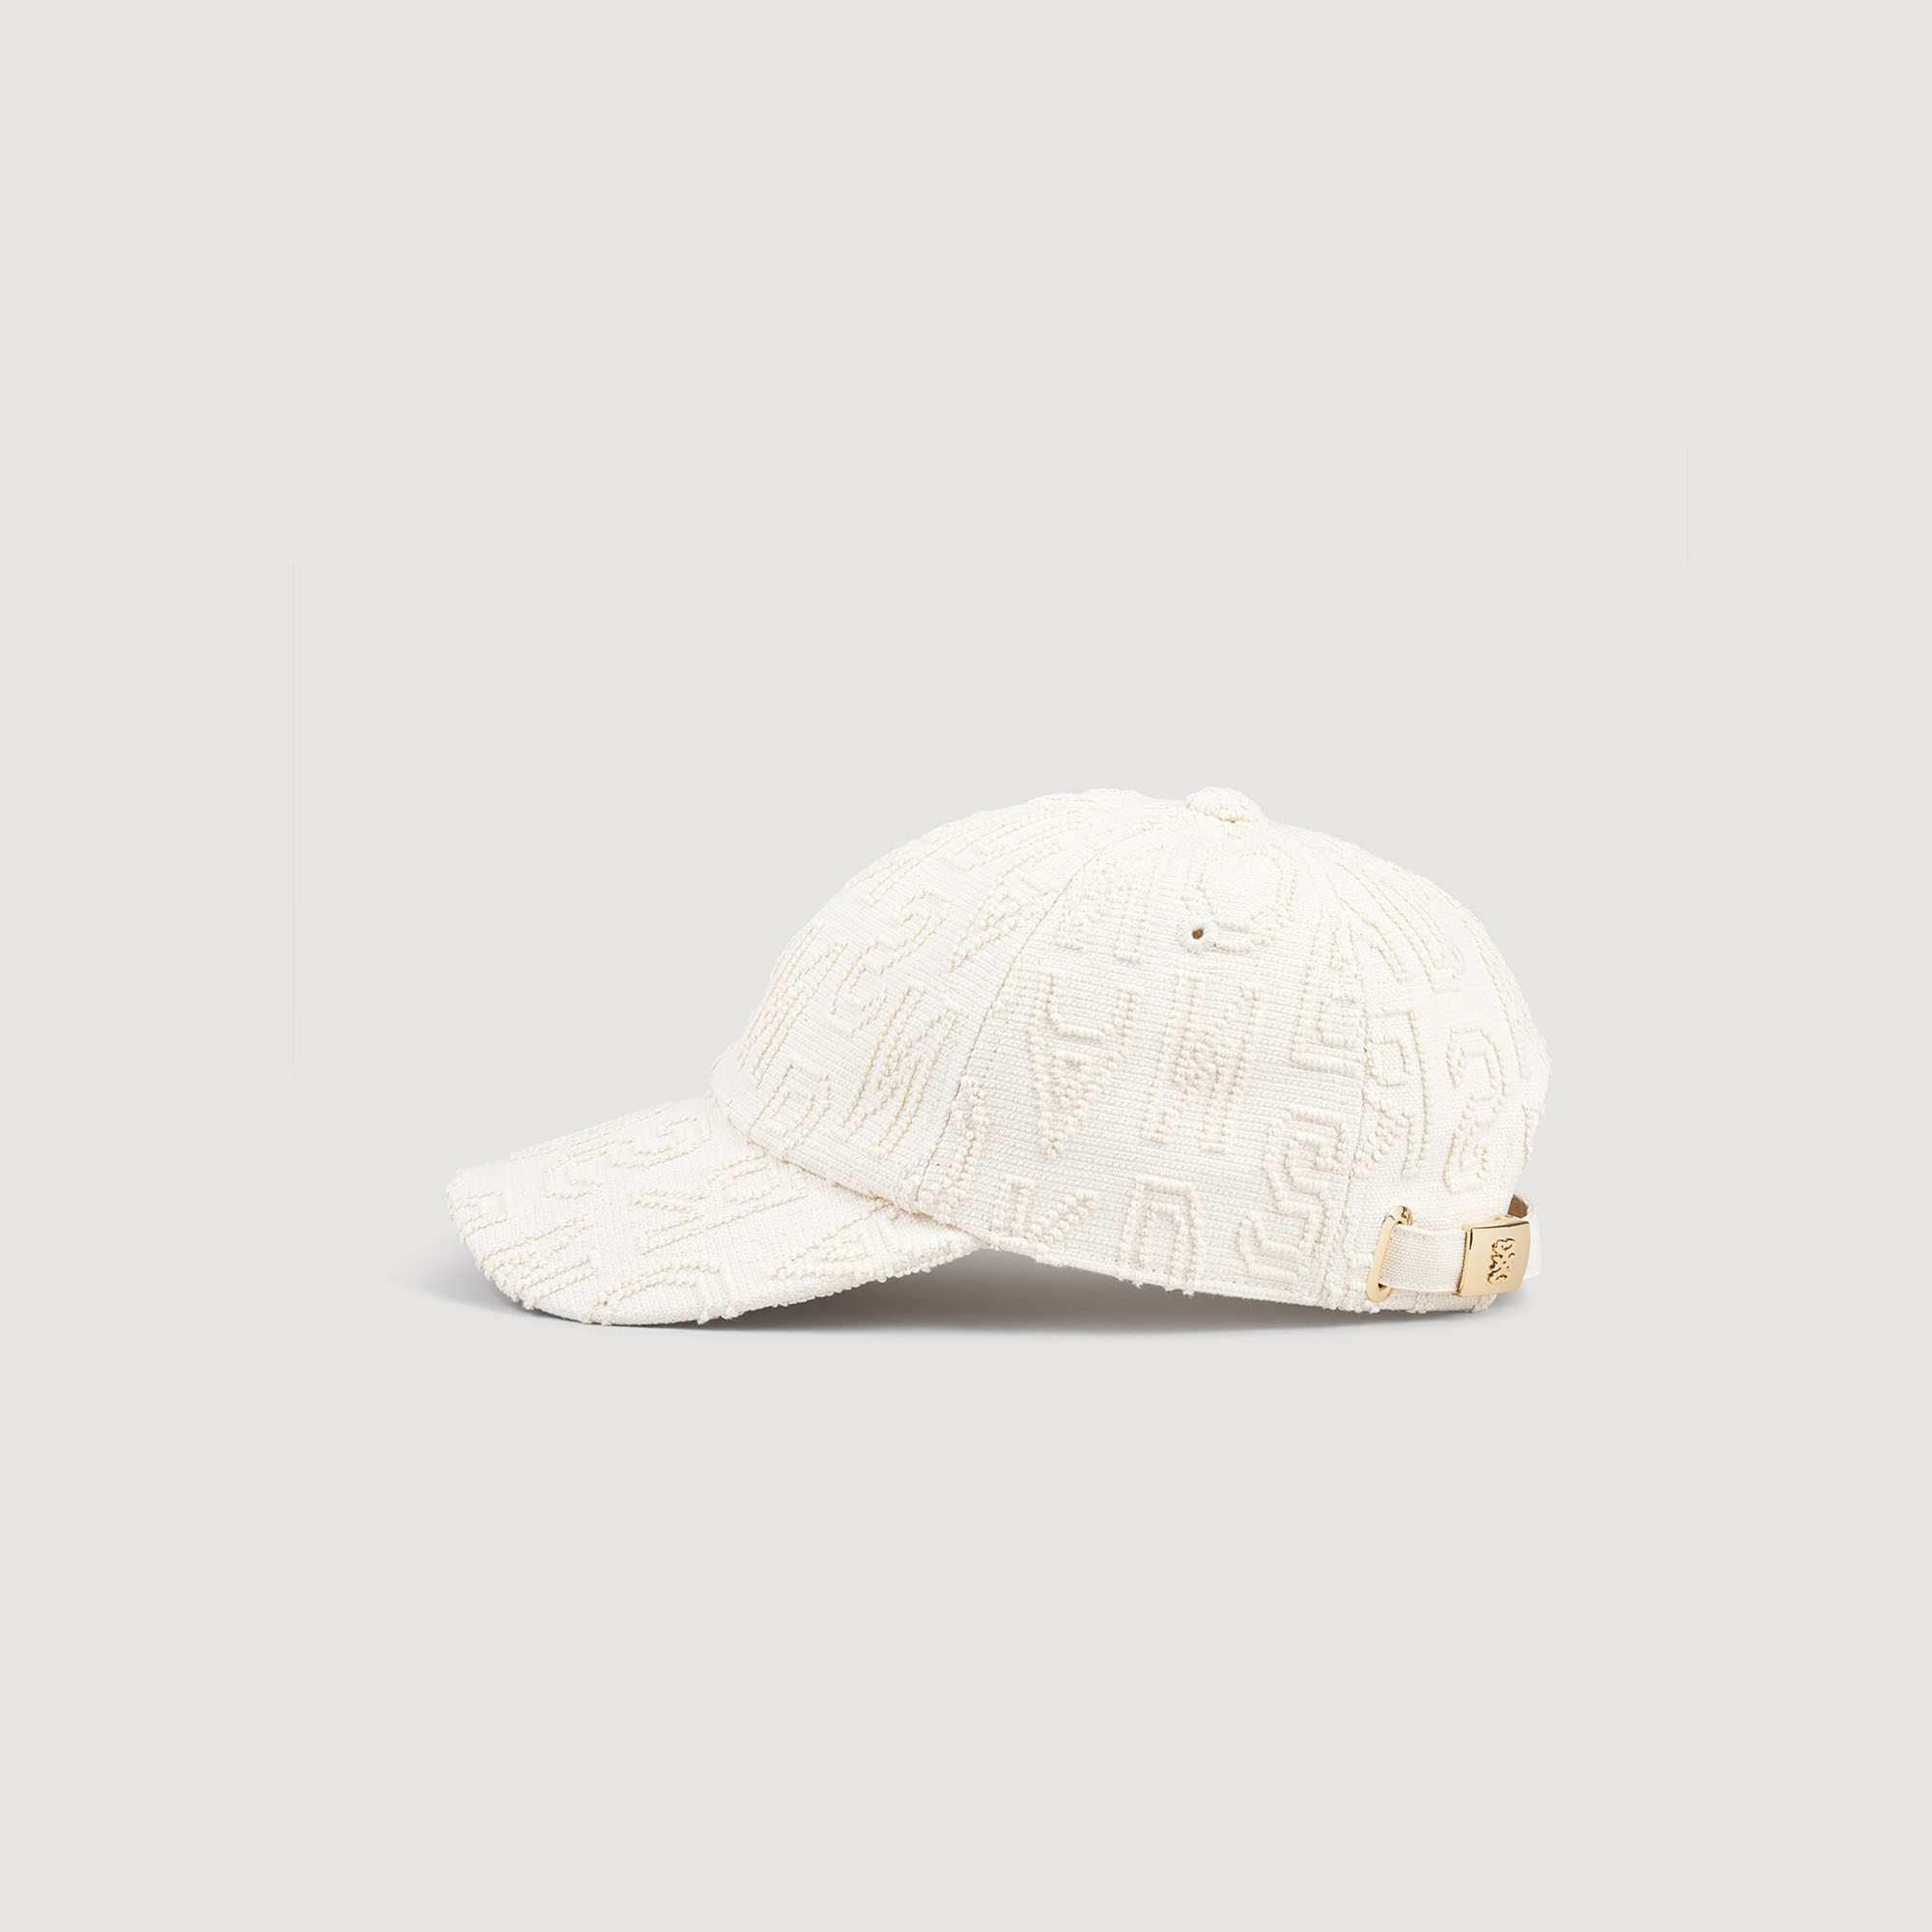 Sandro cotton Cotton cloth cap with jacquard embroidered with the letters Sandro, fitted with an adjustable strap